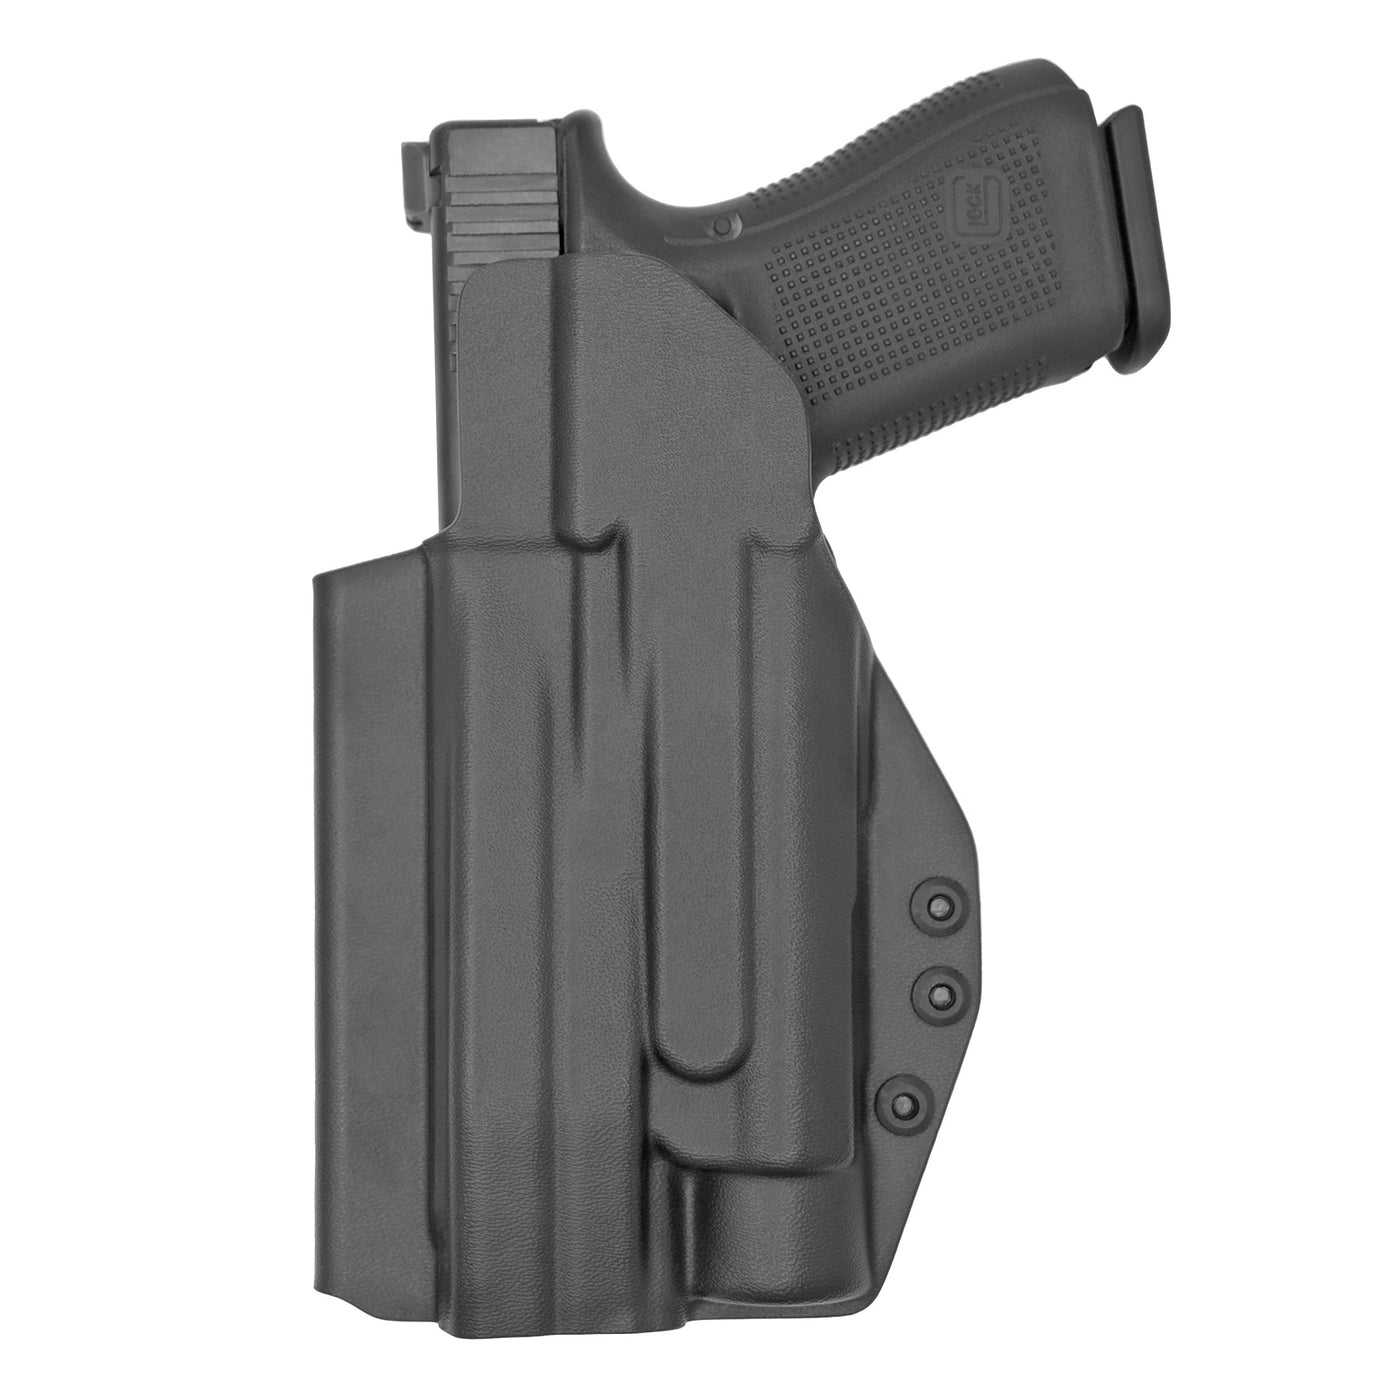 C&G Holsters quickship IWB Tactical Shadow Systems Streamlight TLR1 holstered back view